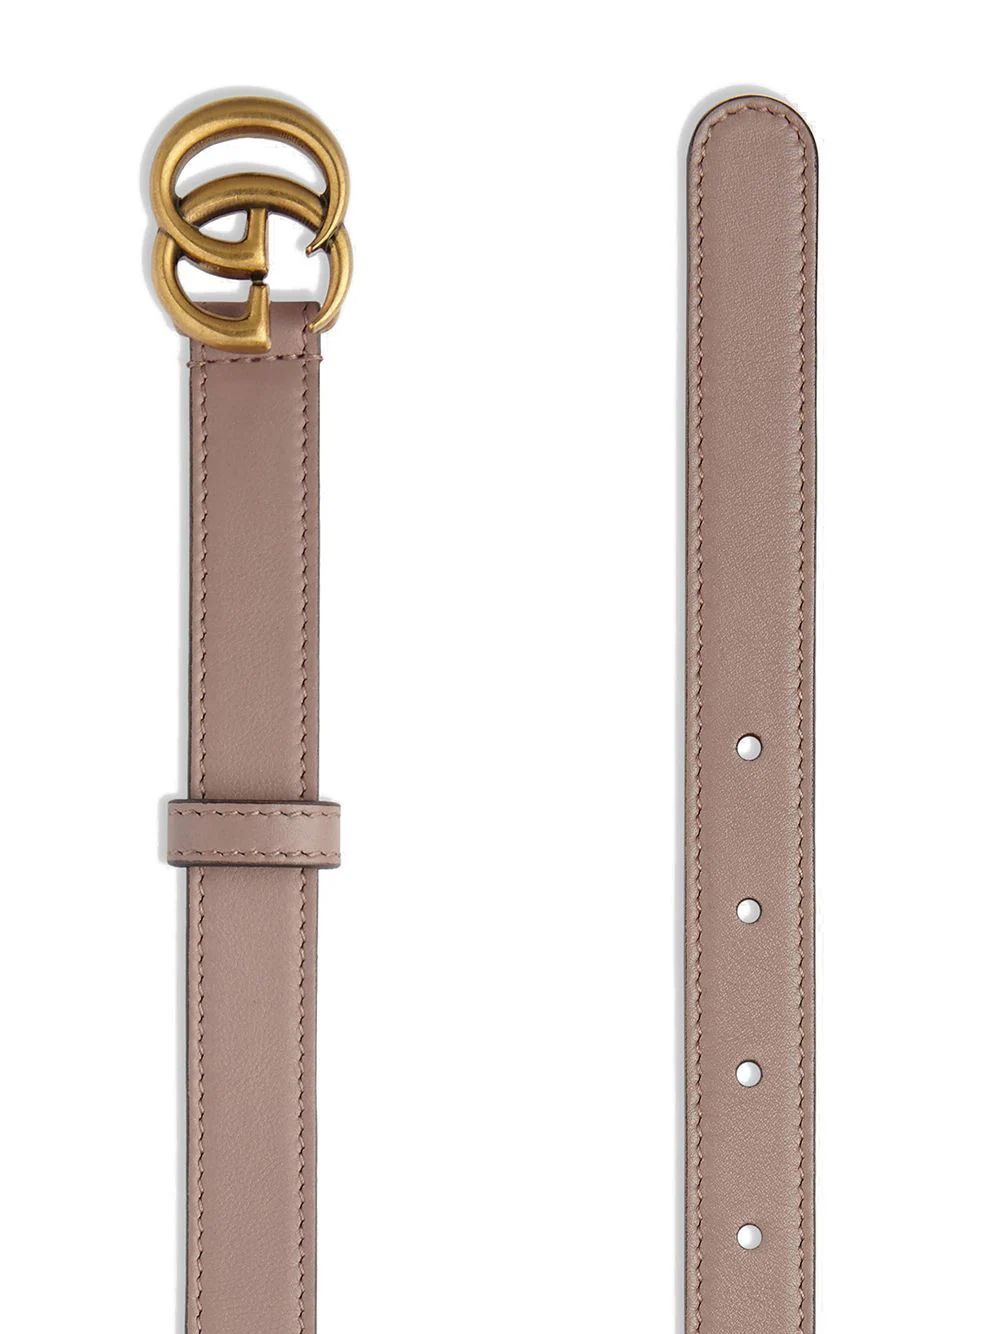 Leather belt with Double G buckle | Farfetch (US)